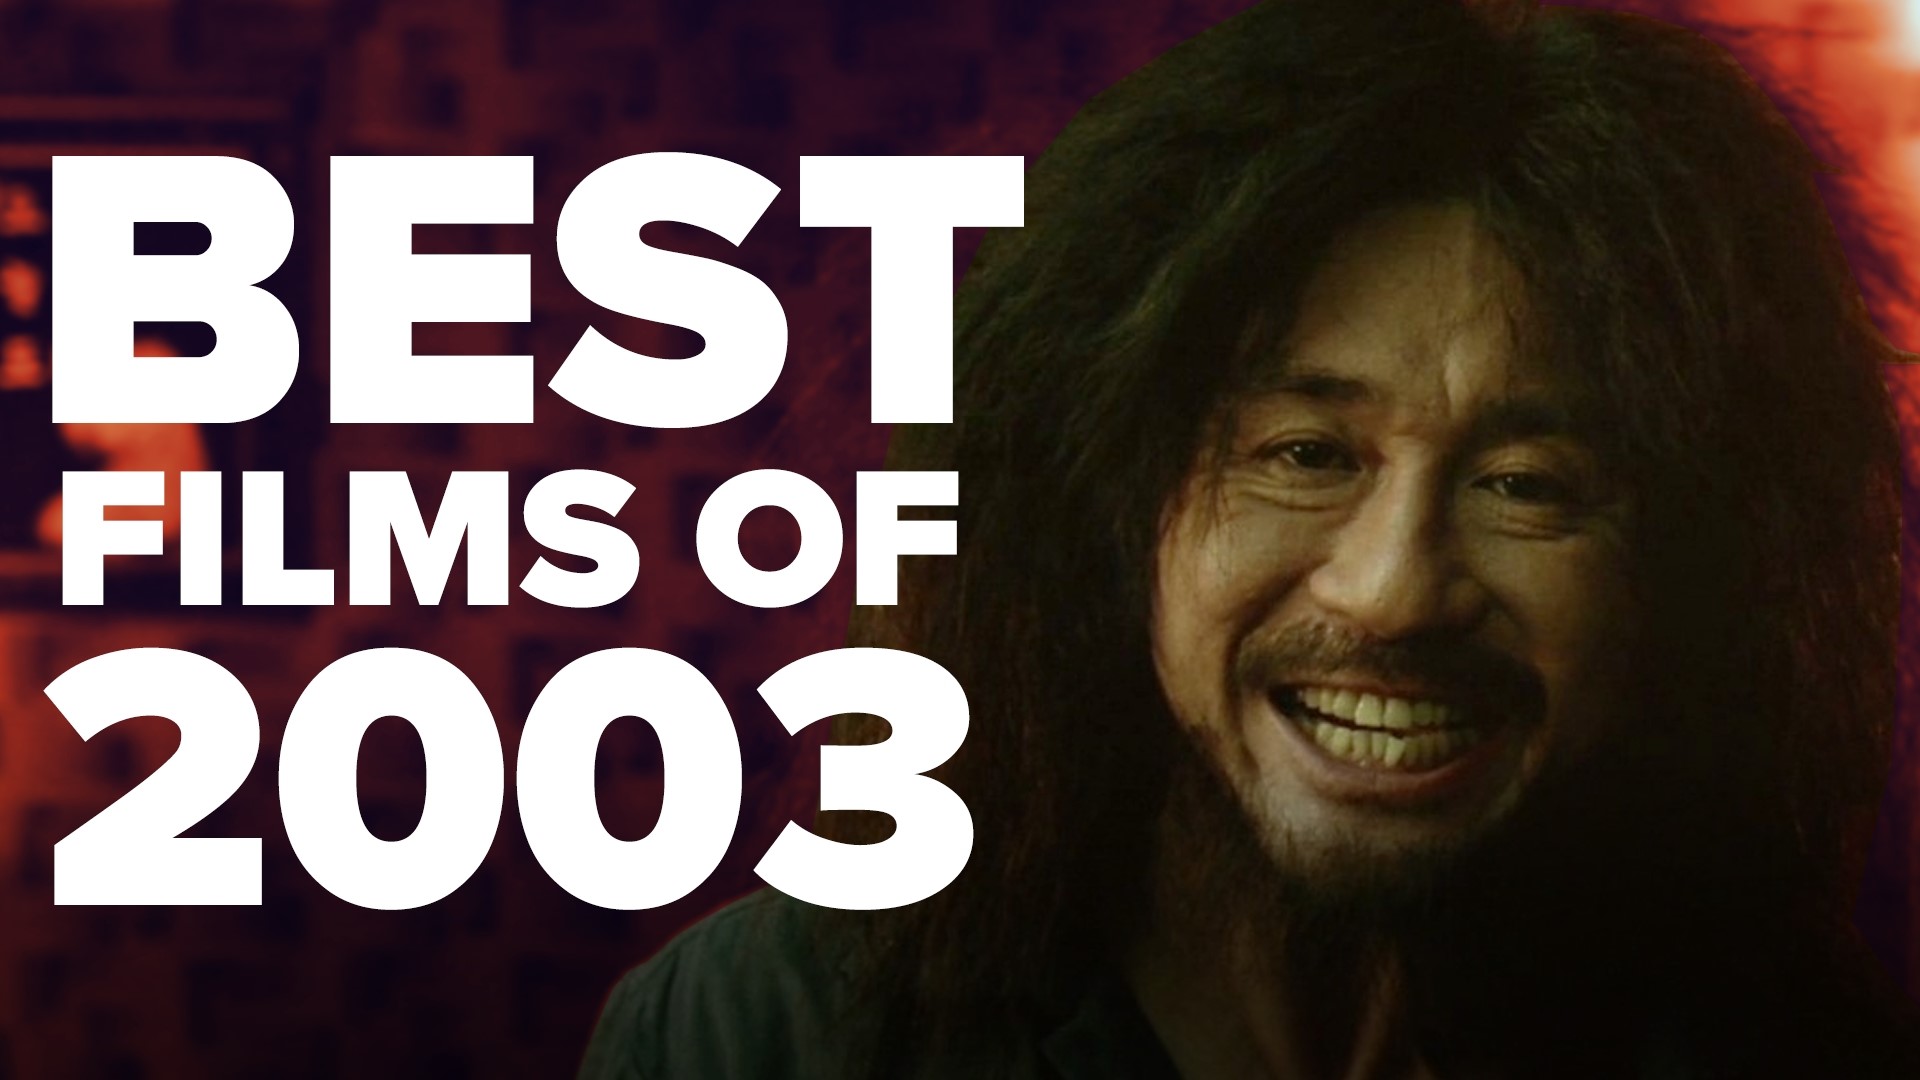 Nearly 20 years later, Kill Bill and Oldboy remain some of the most violent but memorable movies from the 2000s and of course the conclusion of the Lord of the Rings